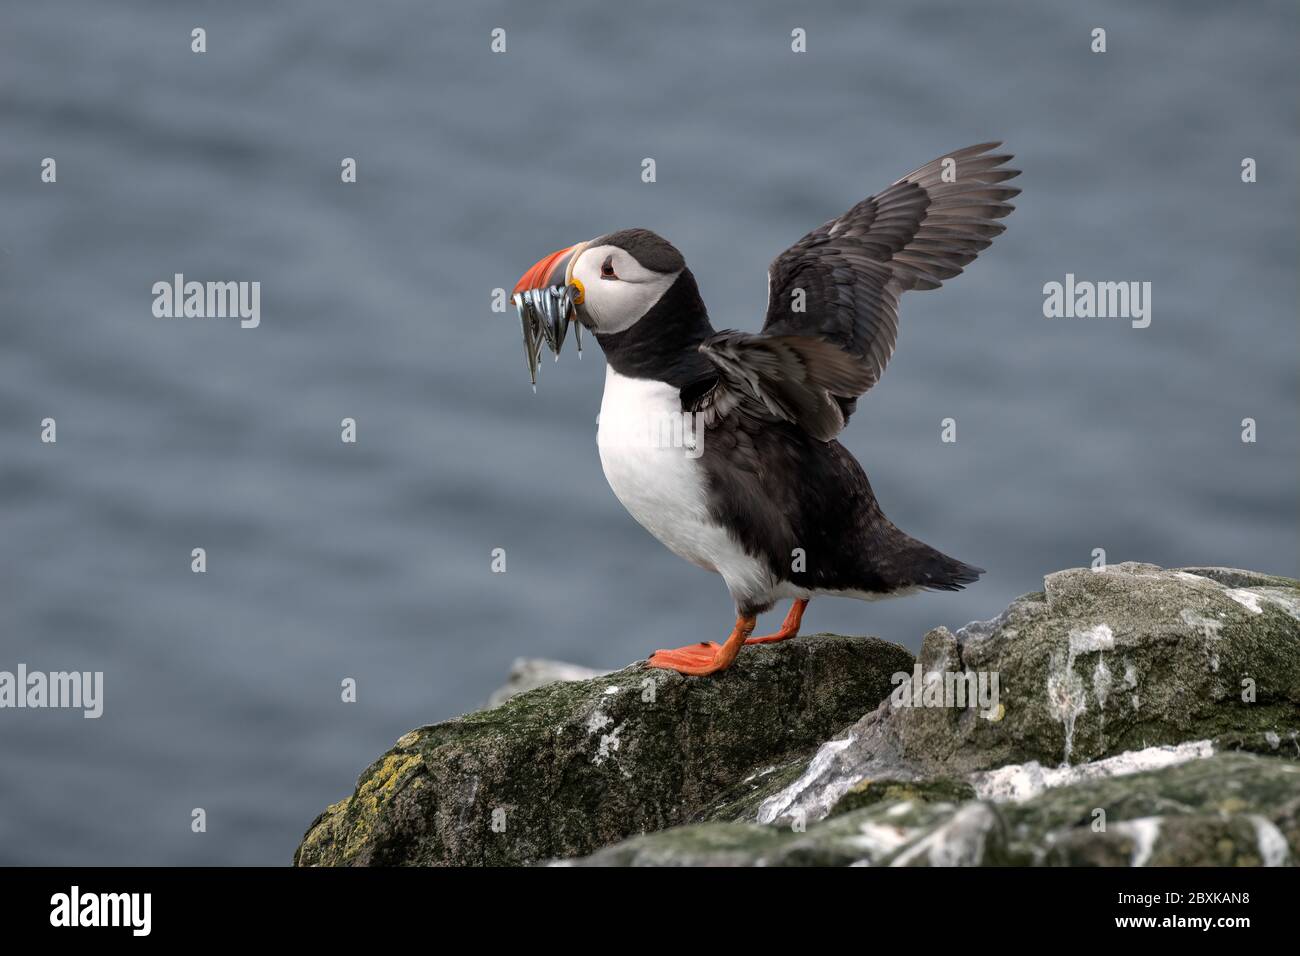 Puffin standing on a rock, flapping its wings, with sand eels in its mouth and the ocean in the background. Stock Photo